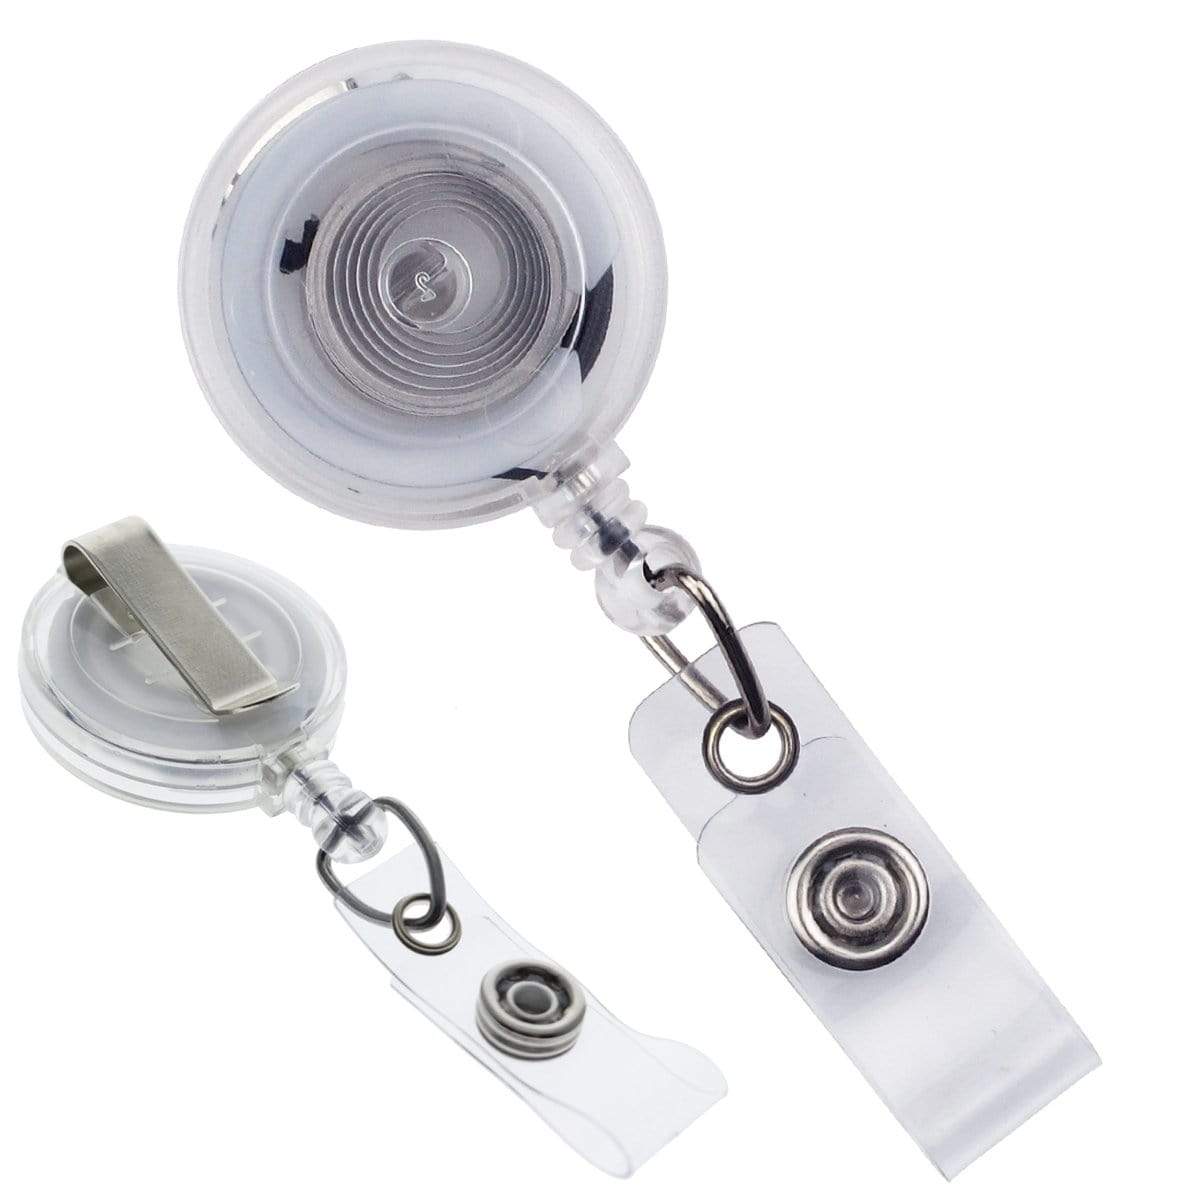 Translucent White (clear) Translucent Retractable Badge Reel With Belt Clip (P/N 2120-360X) 2120-3600